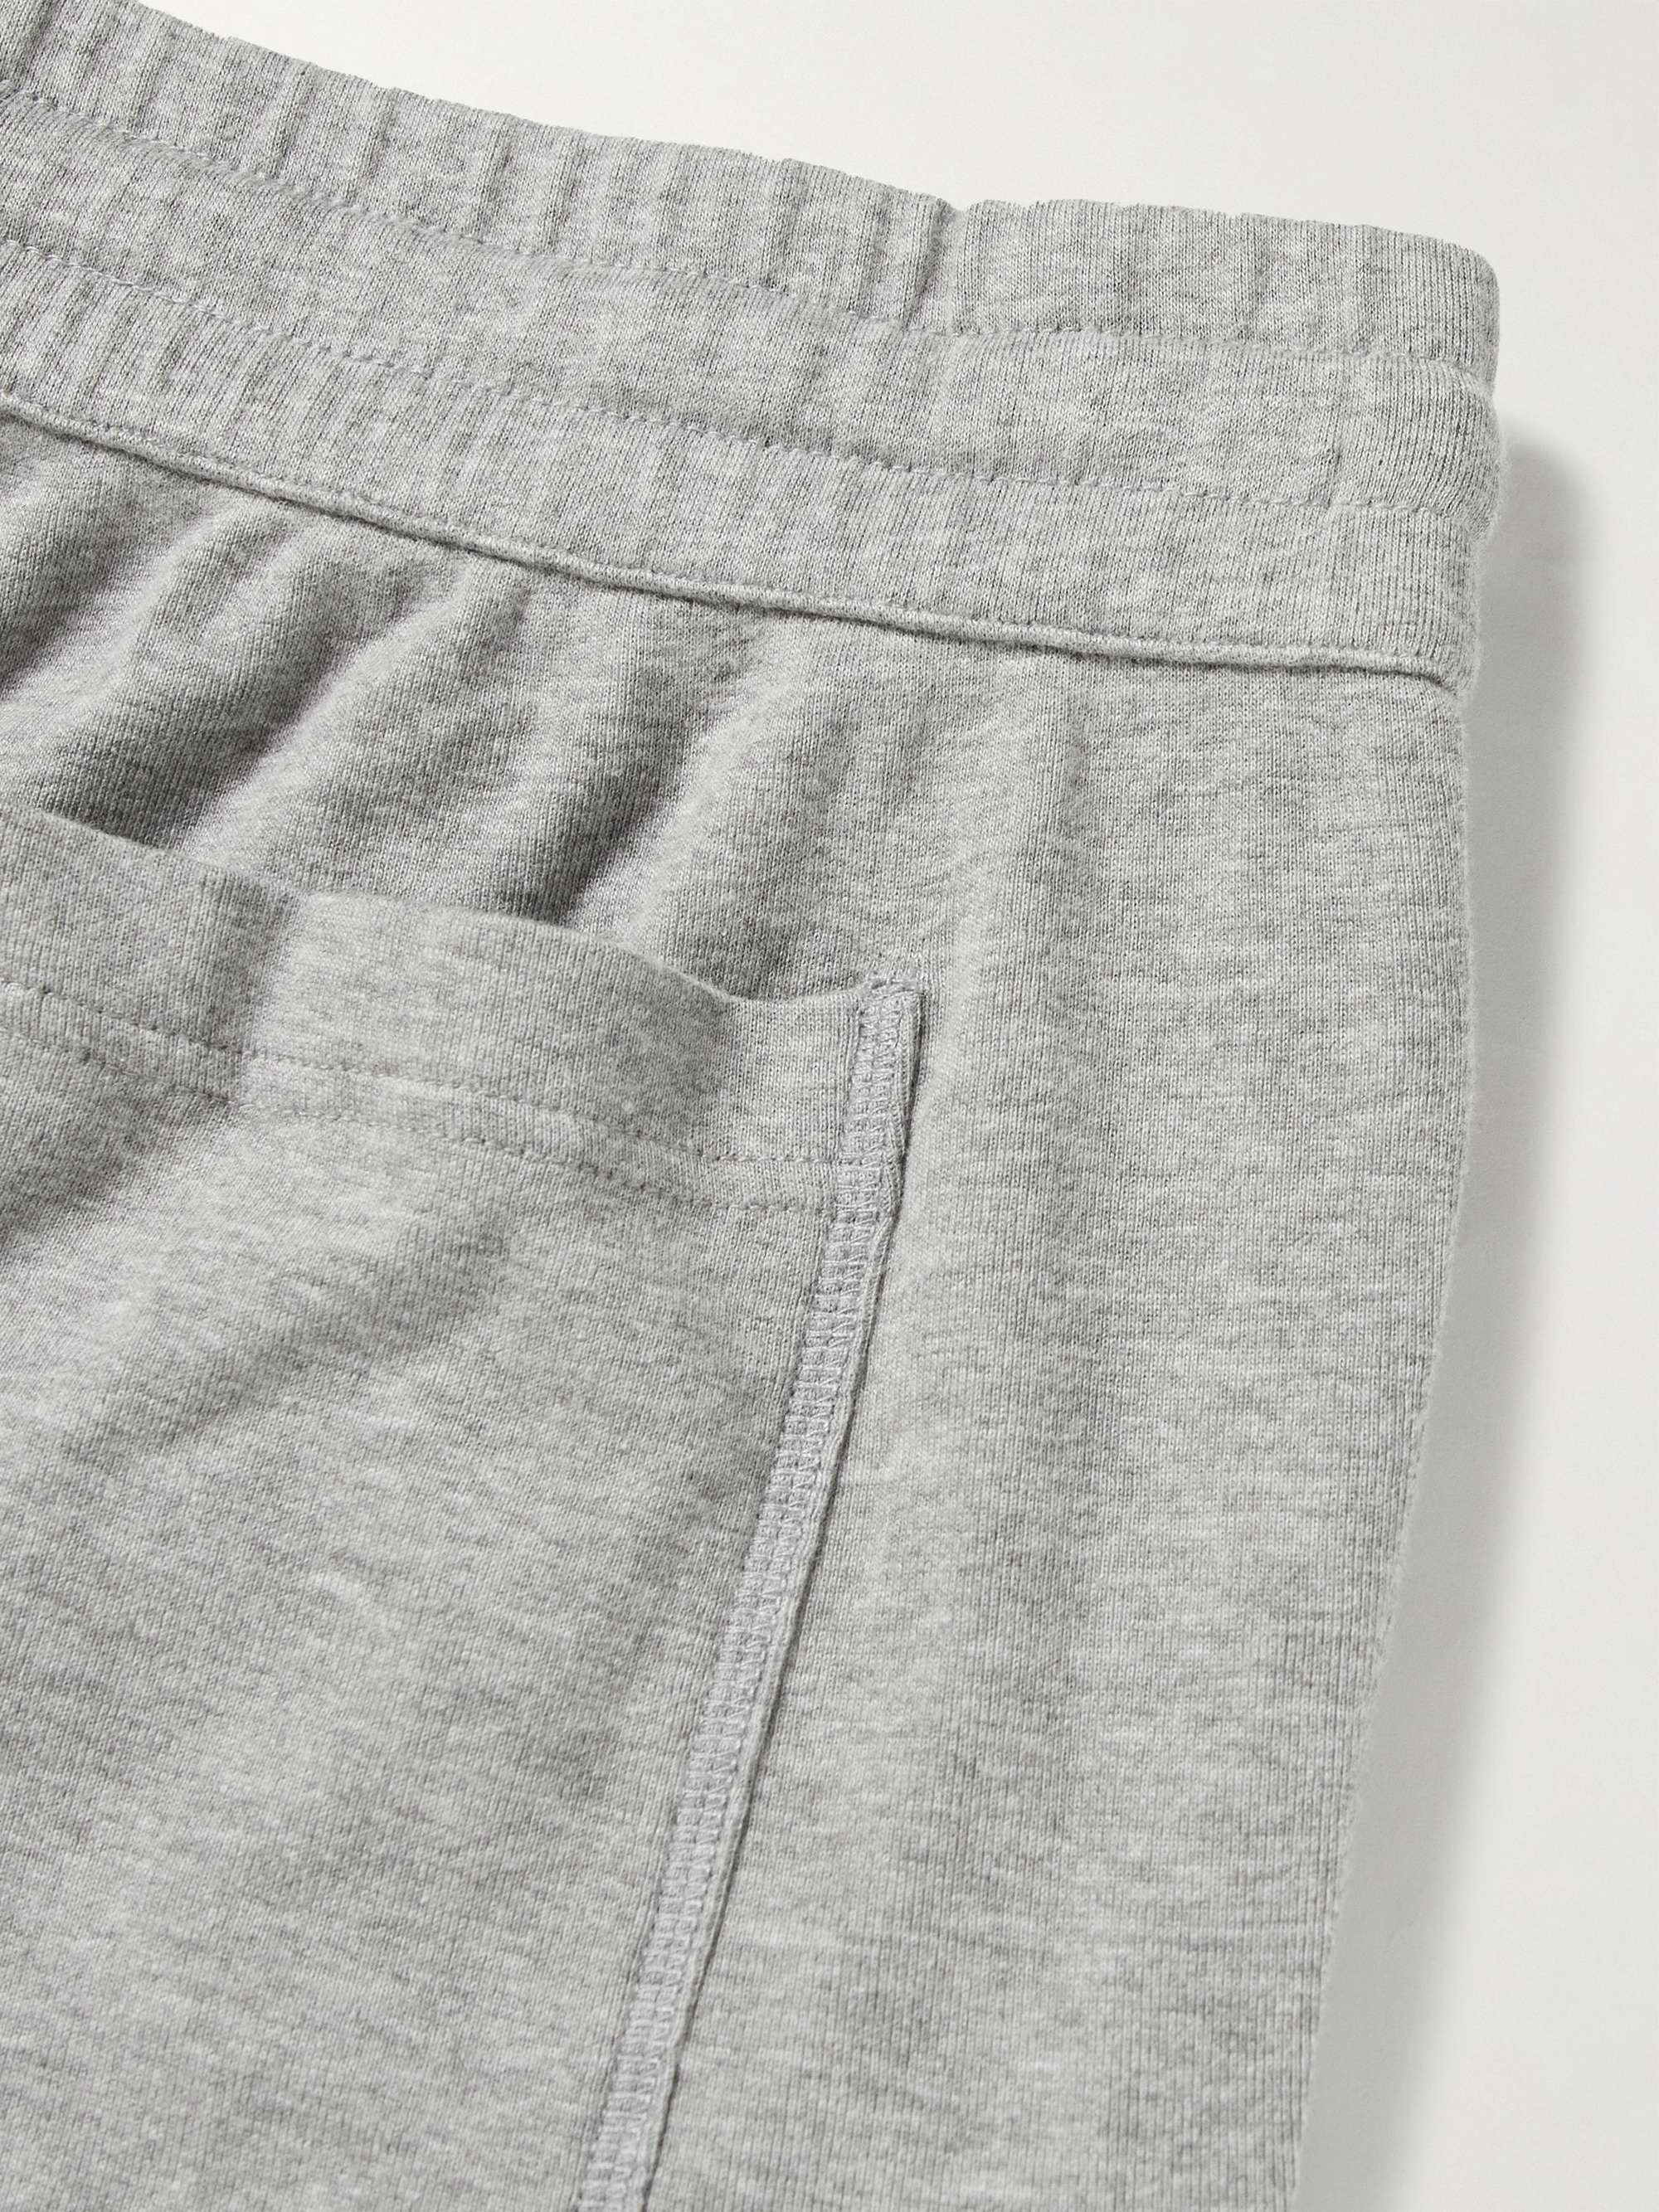 TOM FORD Tapered Brushed Cotton and Modal-Blend Jersey Sweatpants